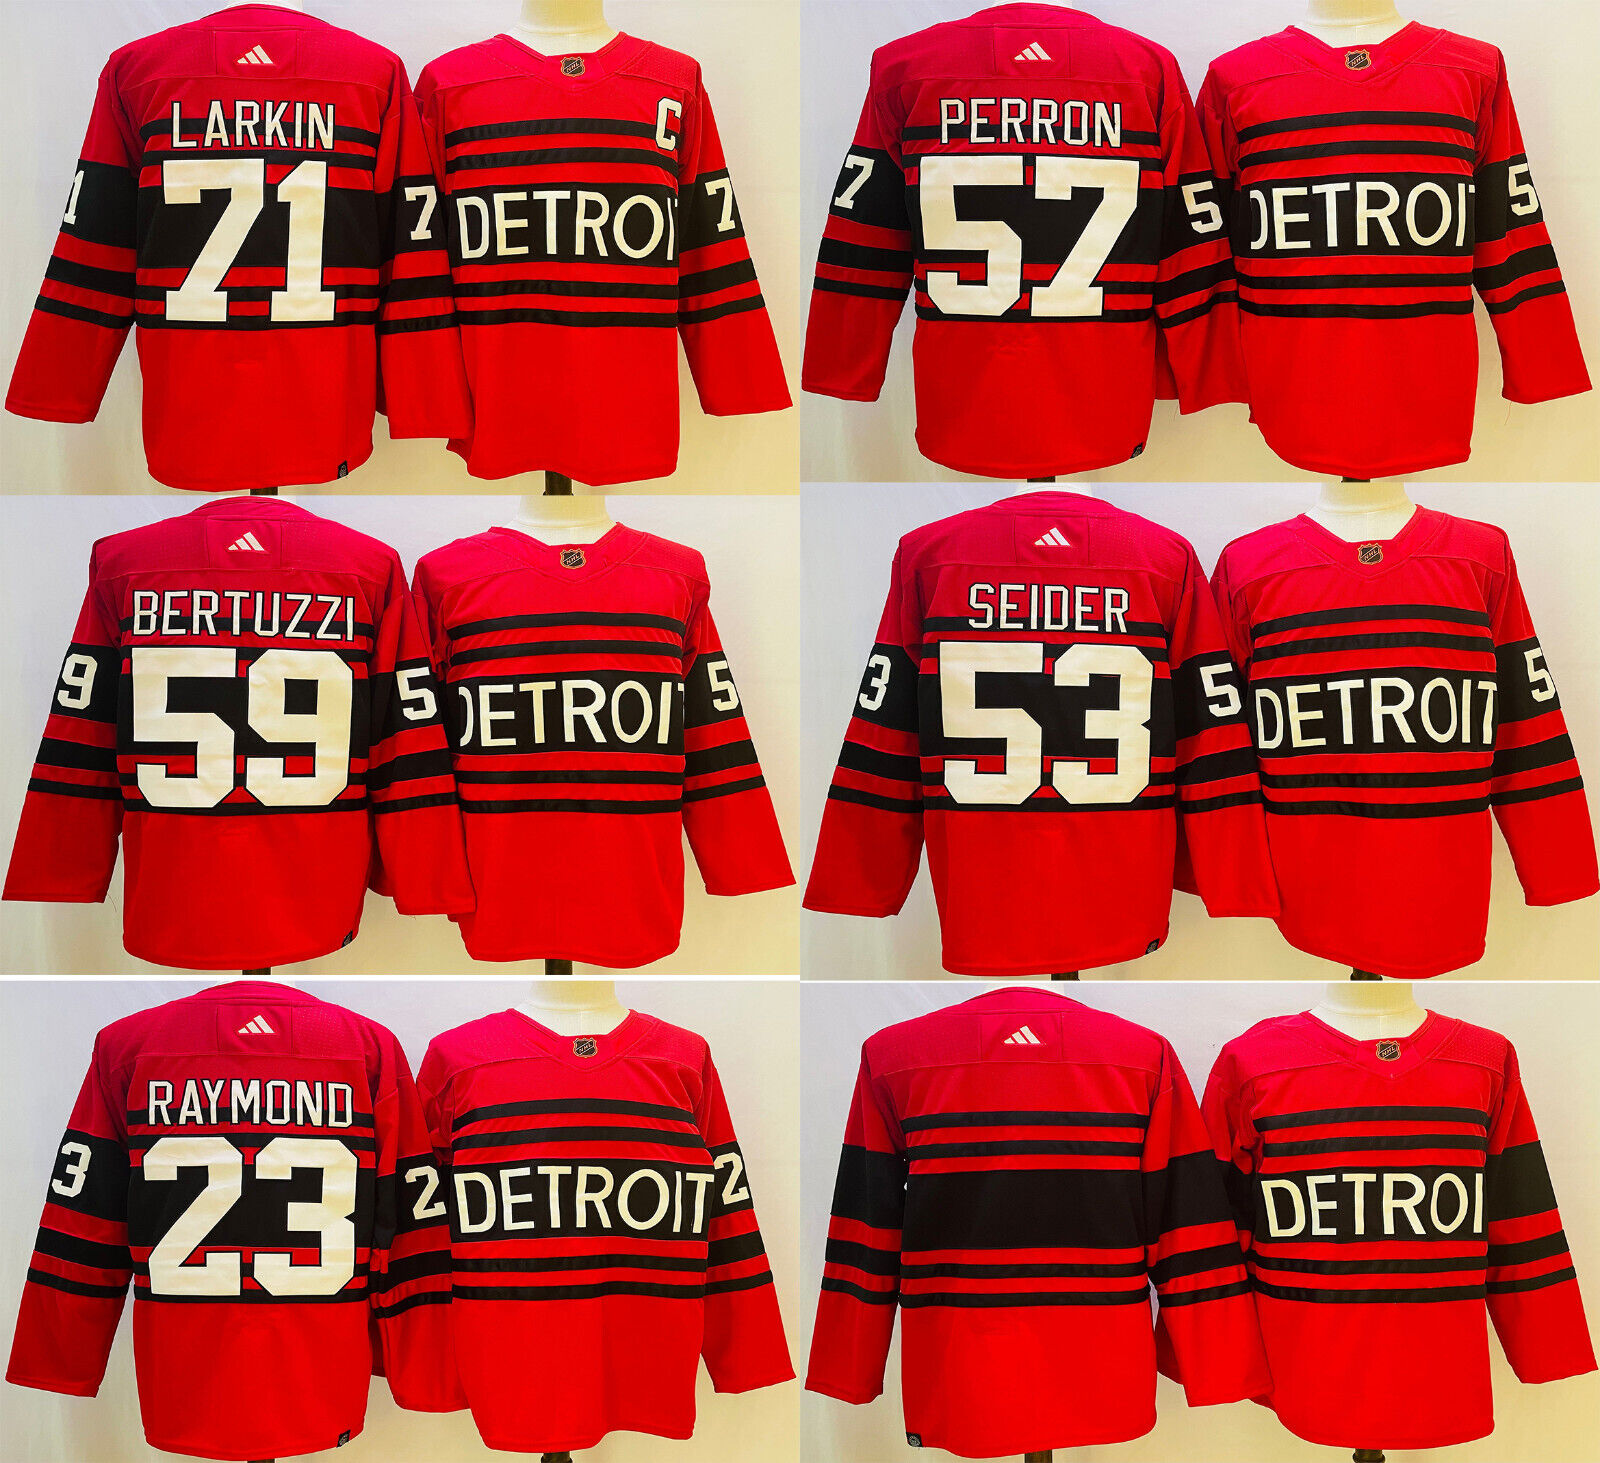 Hot Sale Detroit Red Wings #23 #53 #57 #59 #71 Stitched Hockey Jersey Size:s-3xl